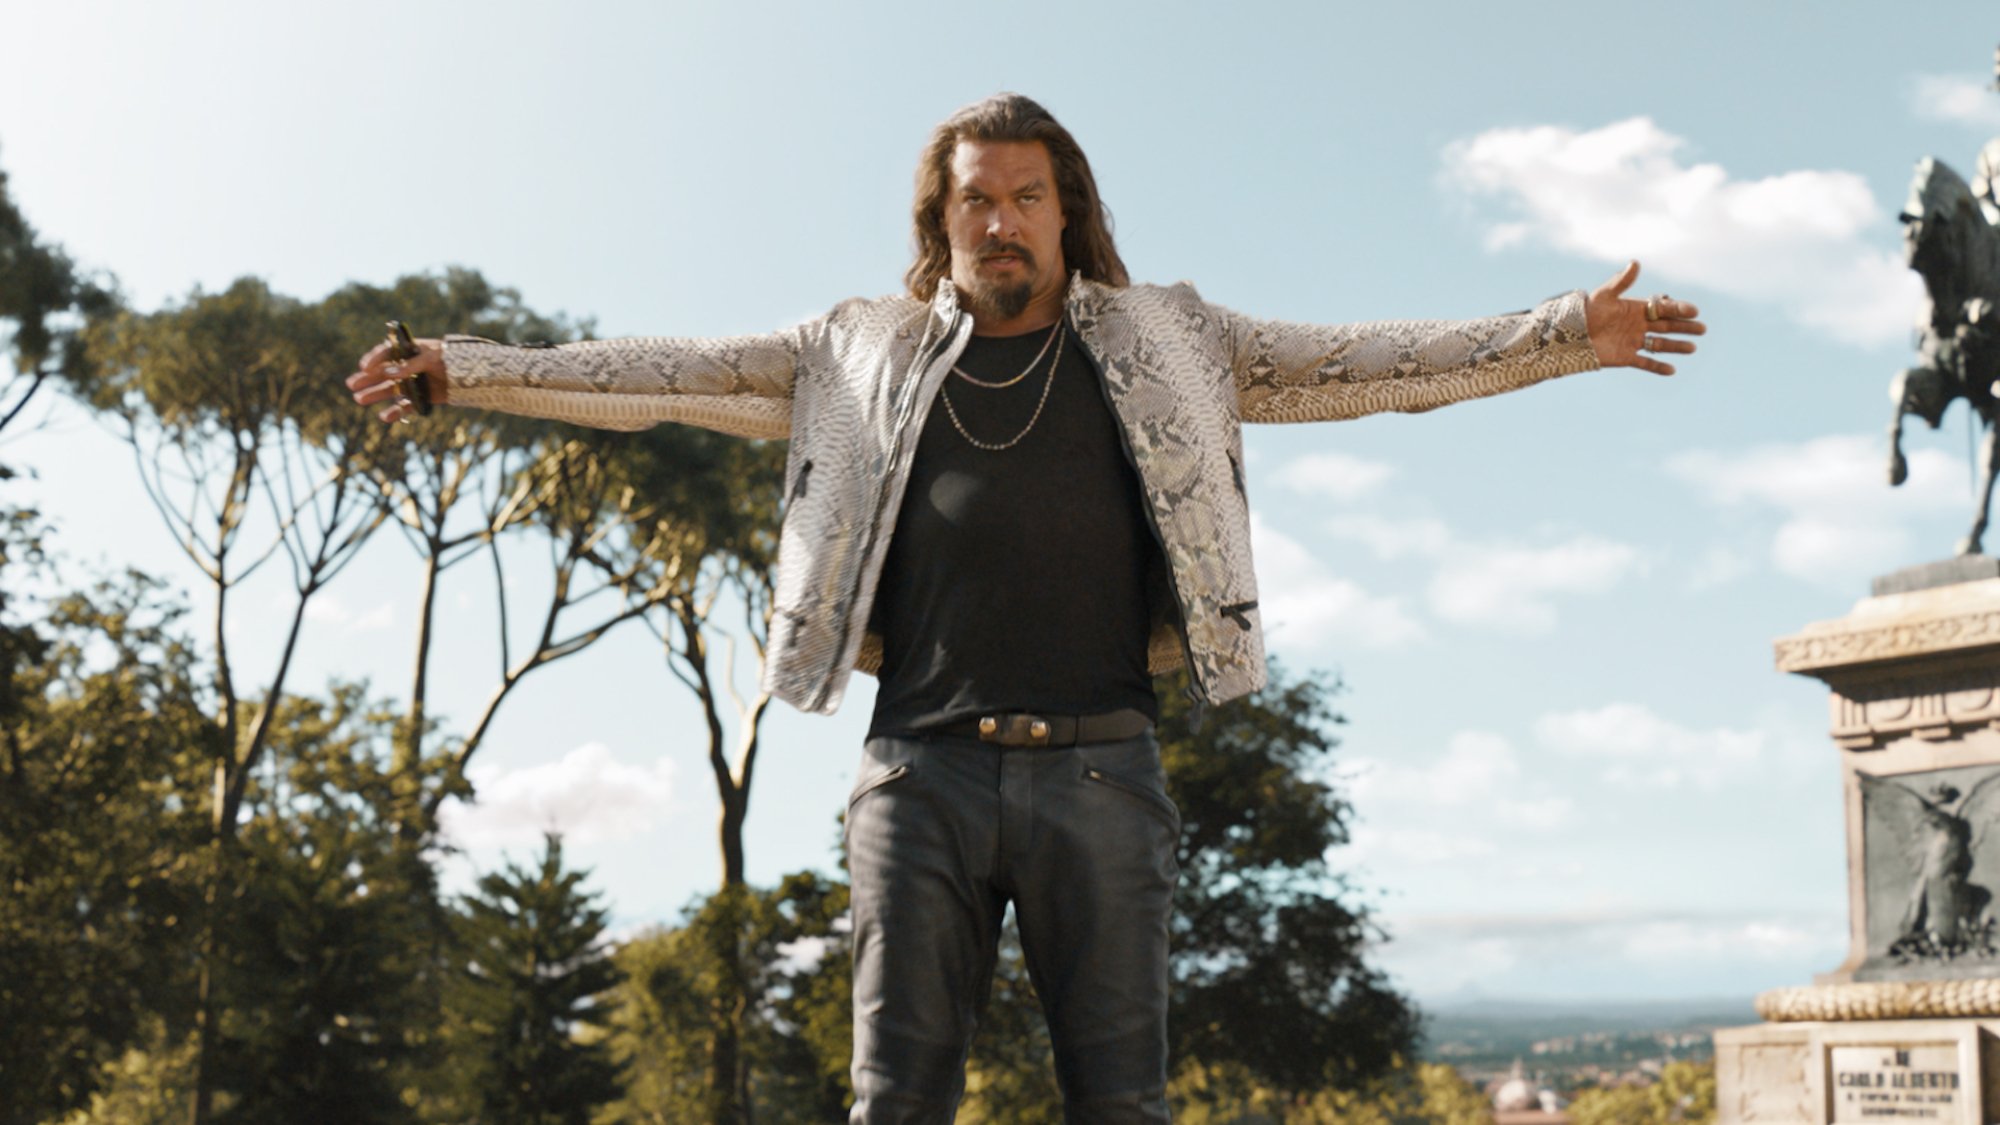 Jason Momoa stands with arms outstretched in the film "Fast X".